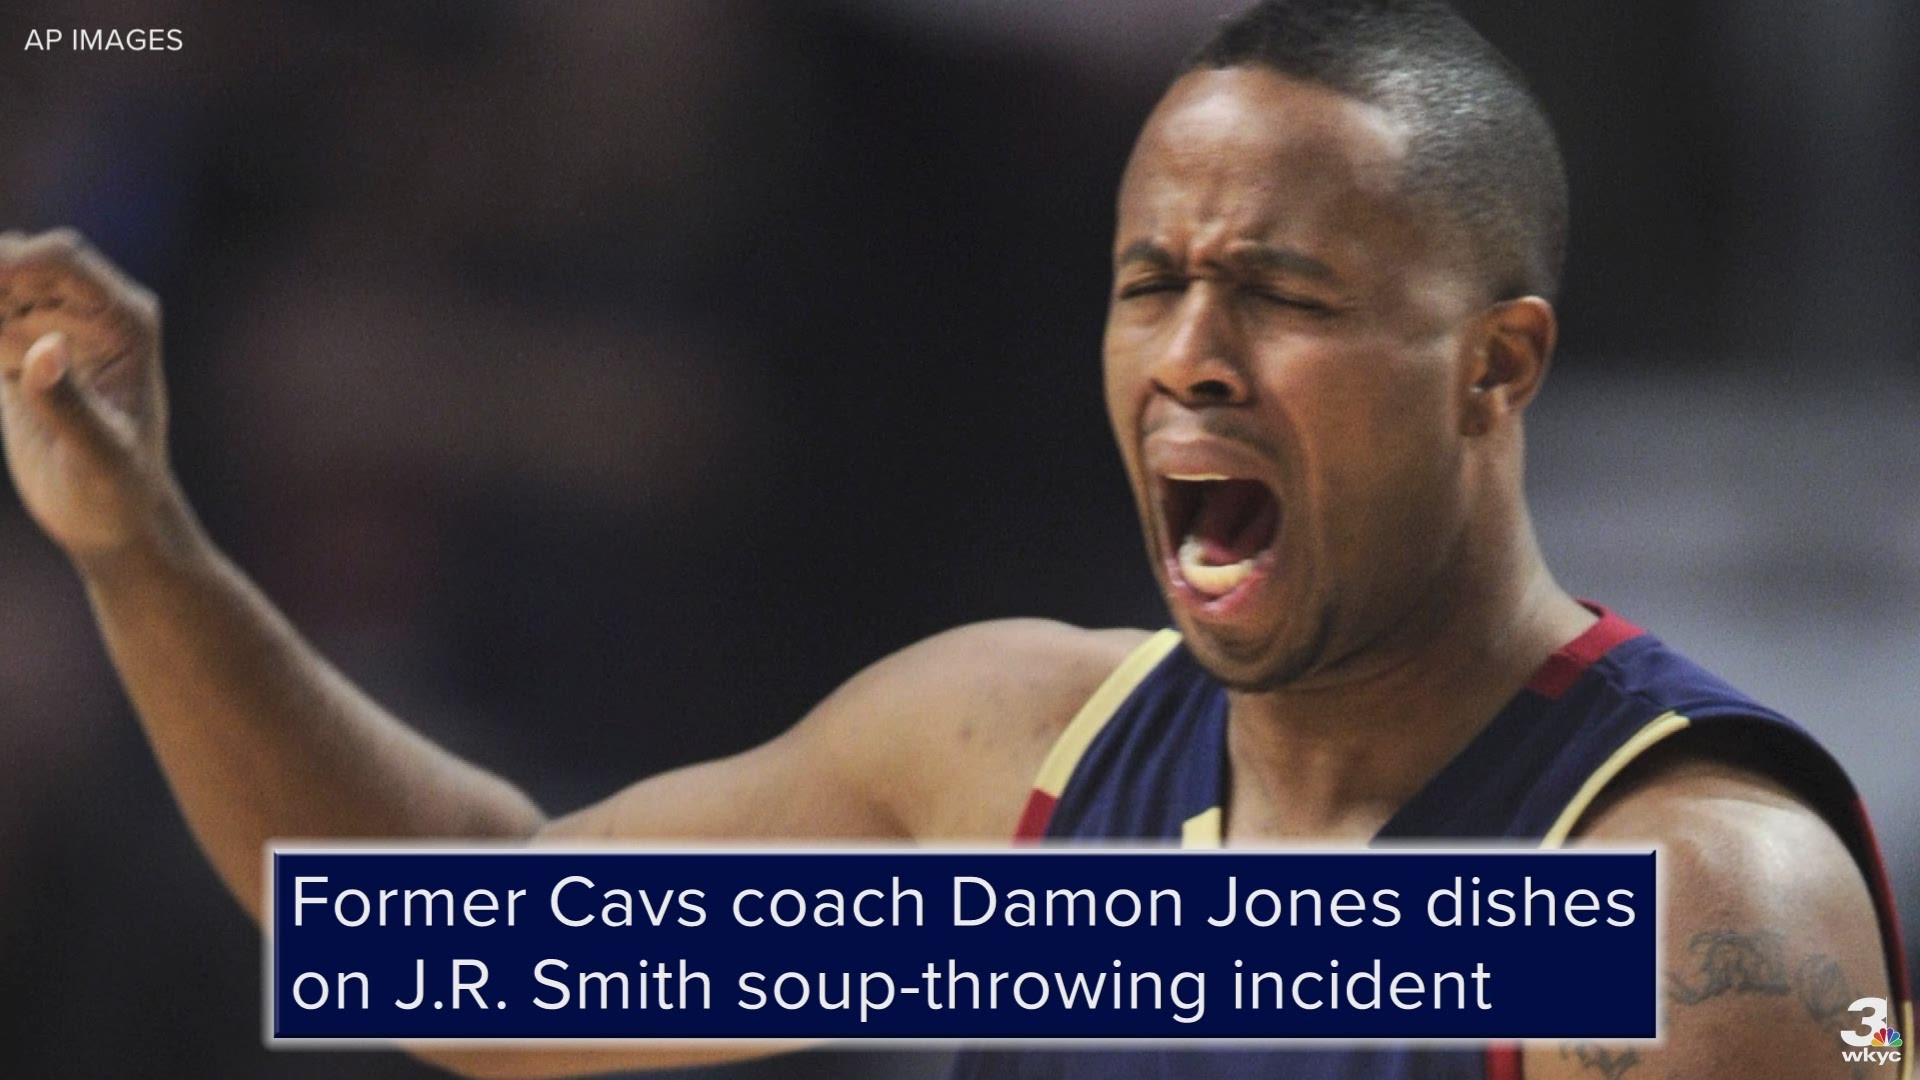 Speaking to ESPN's David Jacoby, former Cleveland Cavaliers assistant coach Damon Jones finally gave the scoop of what happened in the infamous incident between himself and J.R. Smith.